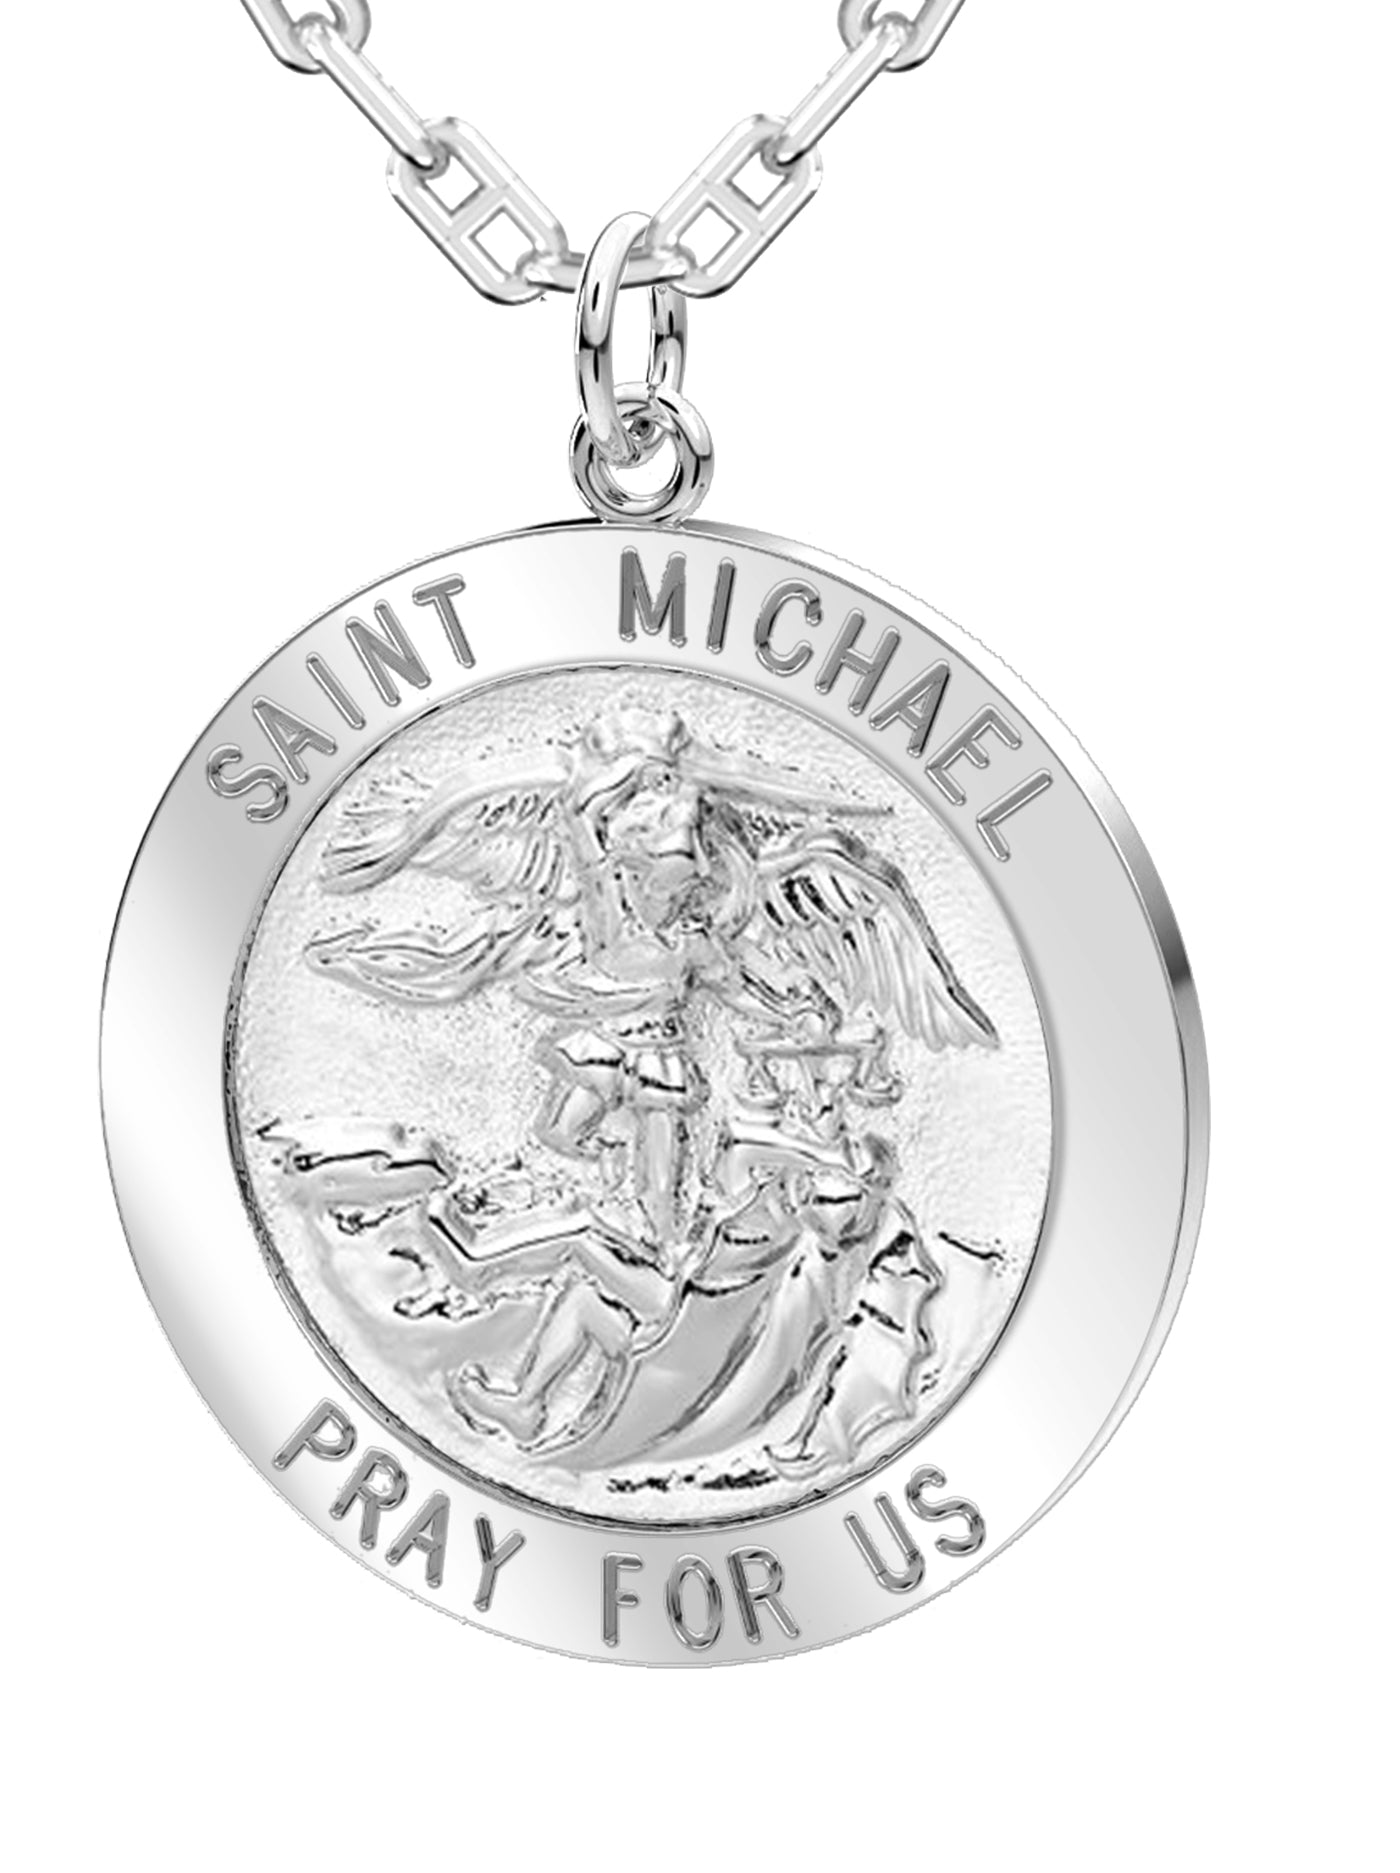 Men's 925 Sterling Silver Saint Michael Round Pendant Necklace, High Polished Finish, 25mm - US Jewels